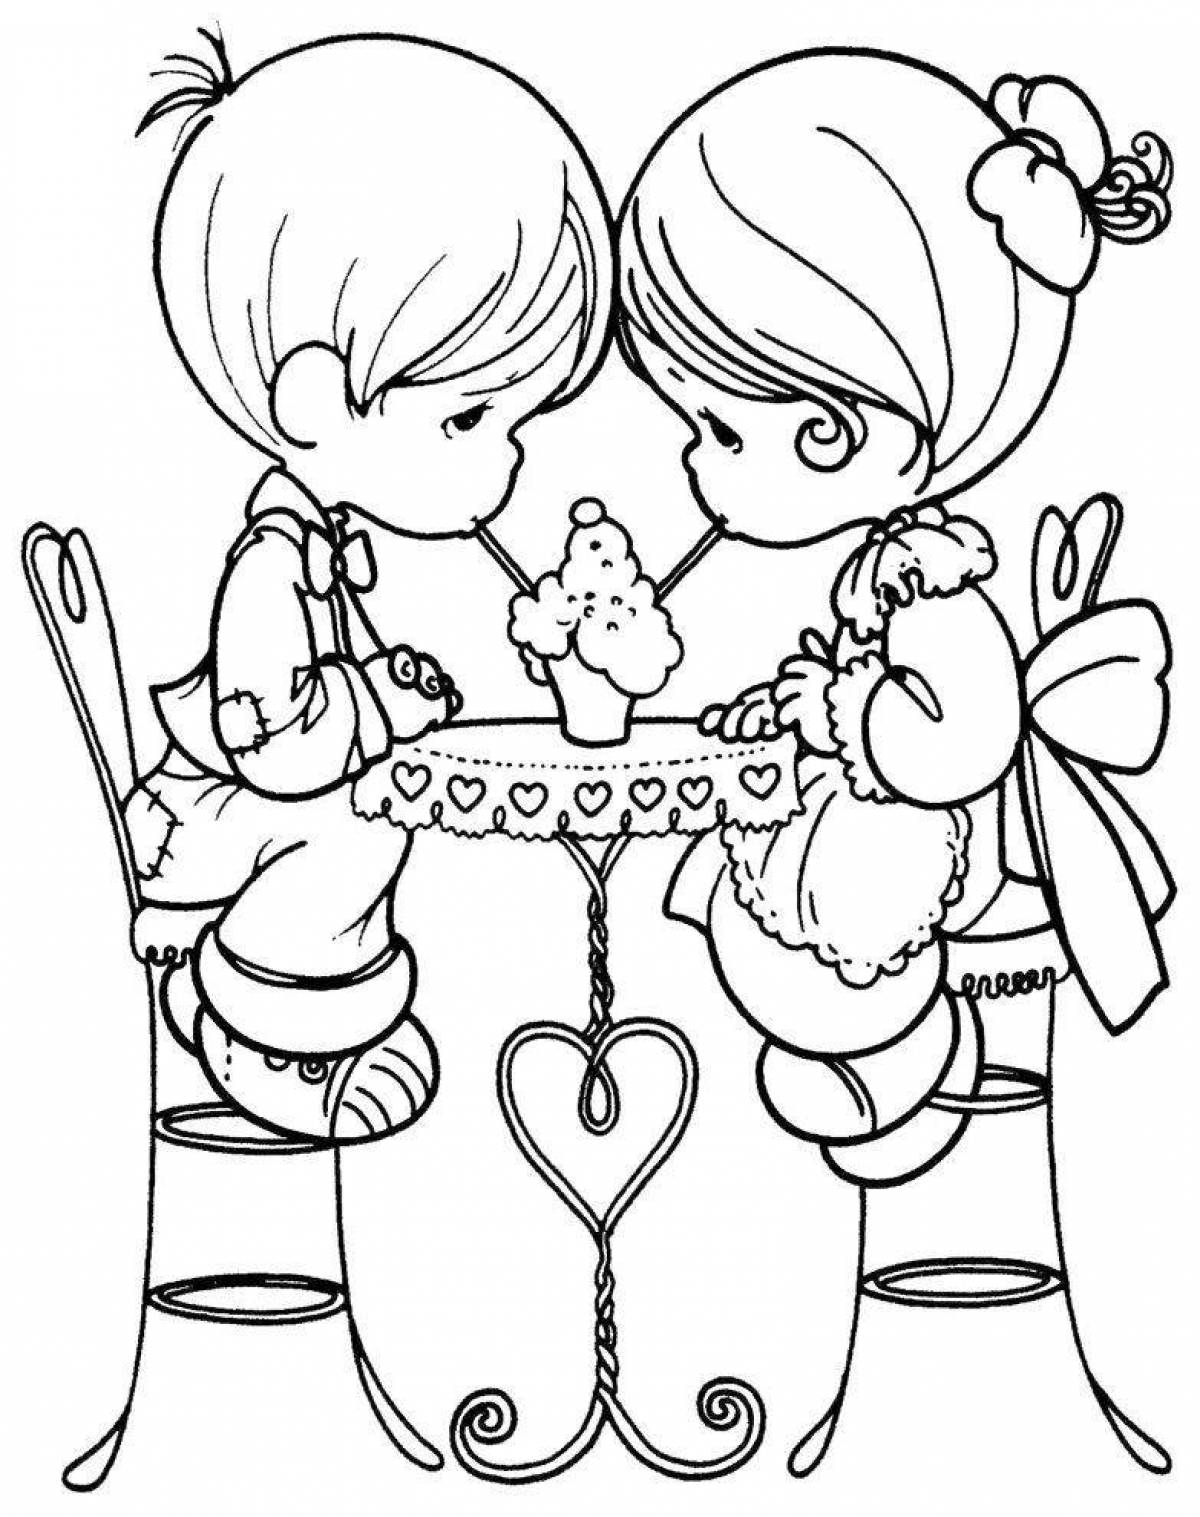 Soulful valentine's day coloring book